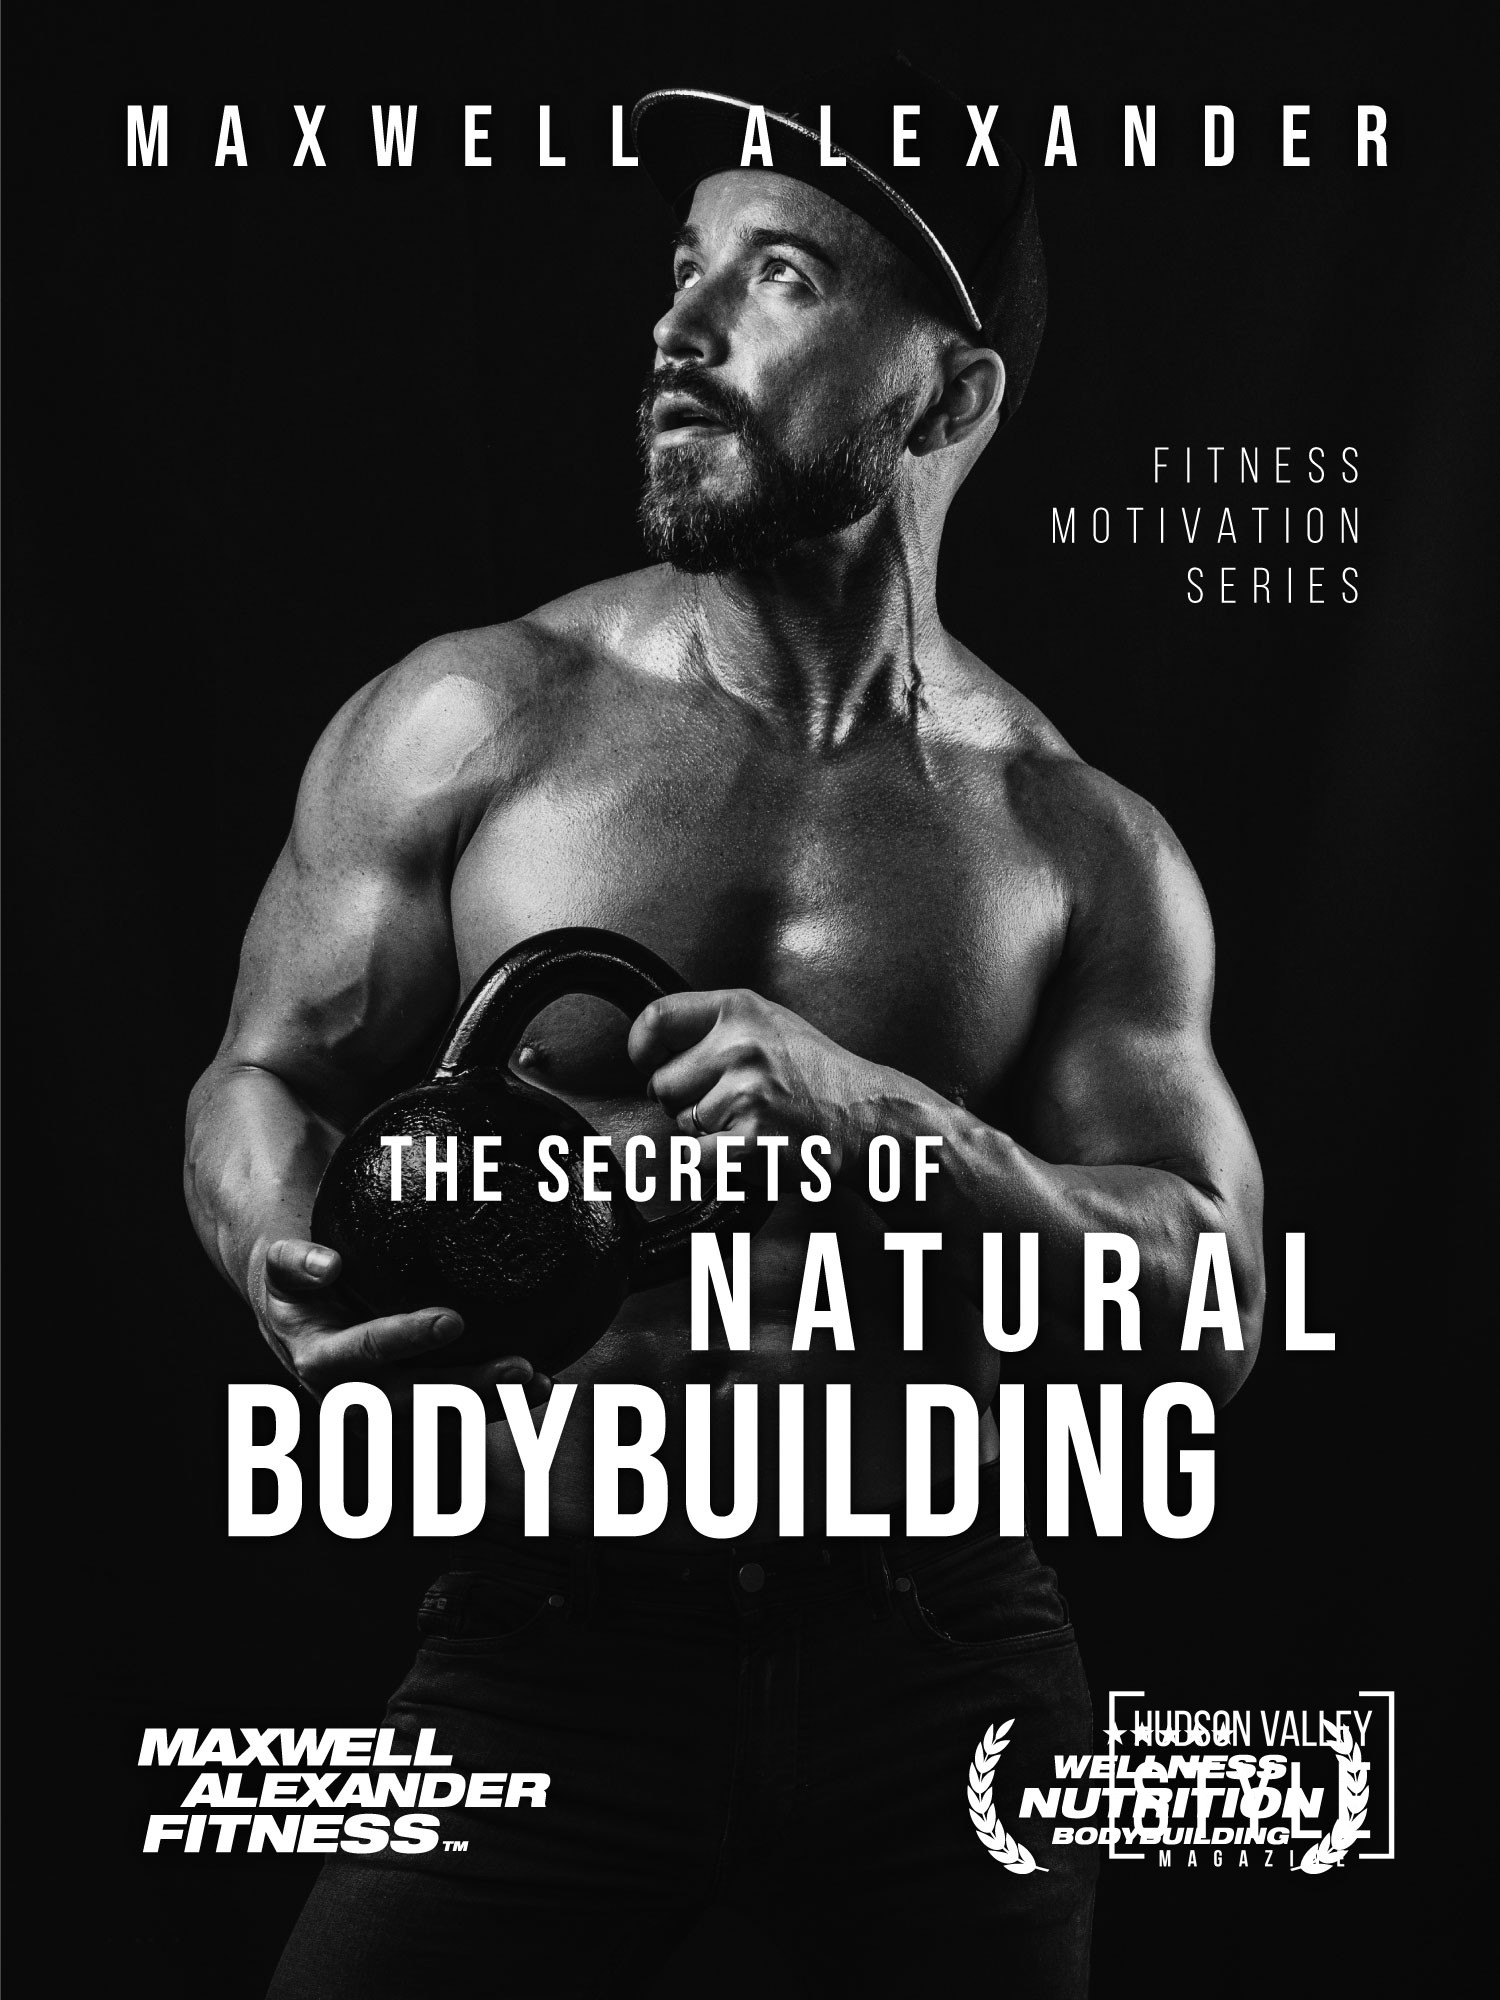 The Secrets of Natural Bodybuilding by Coach Maxwell Alexander